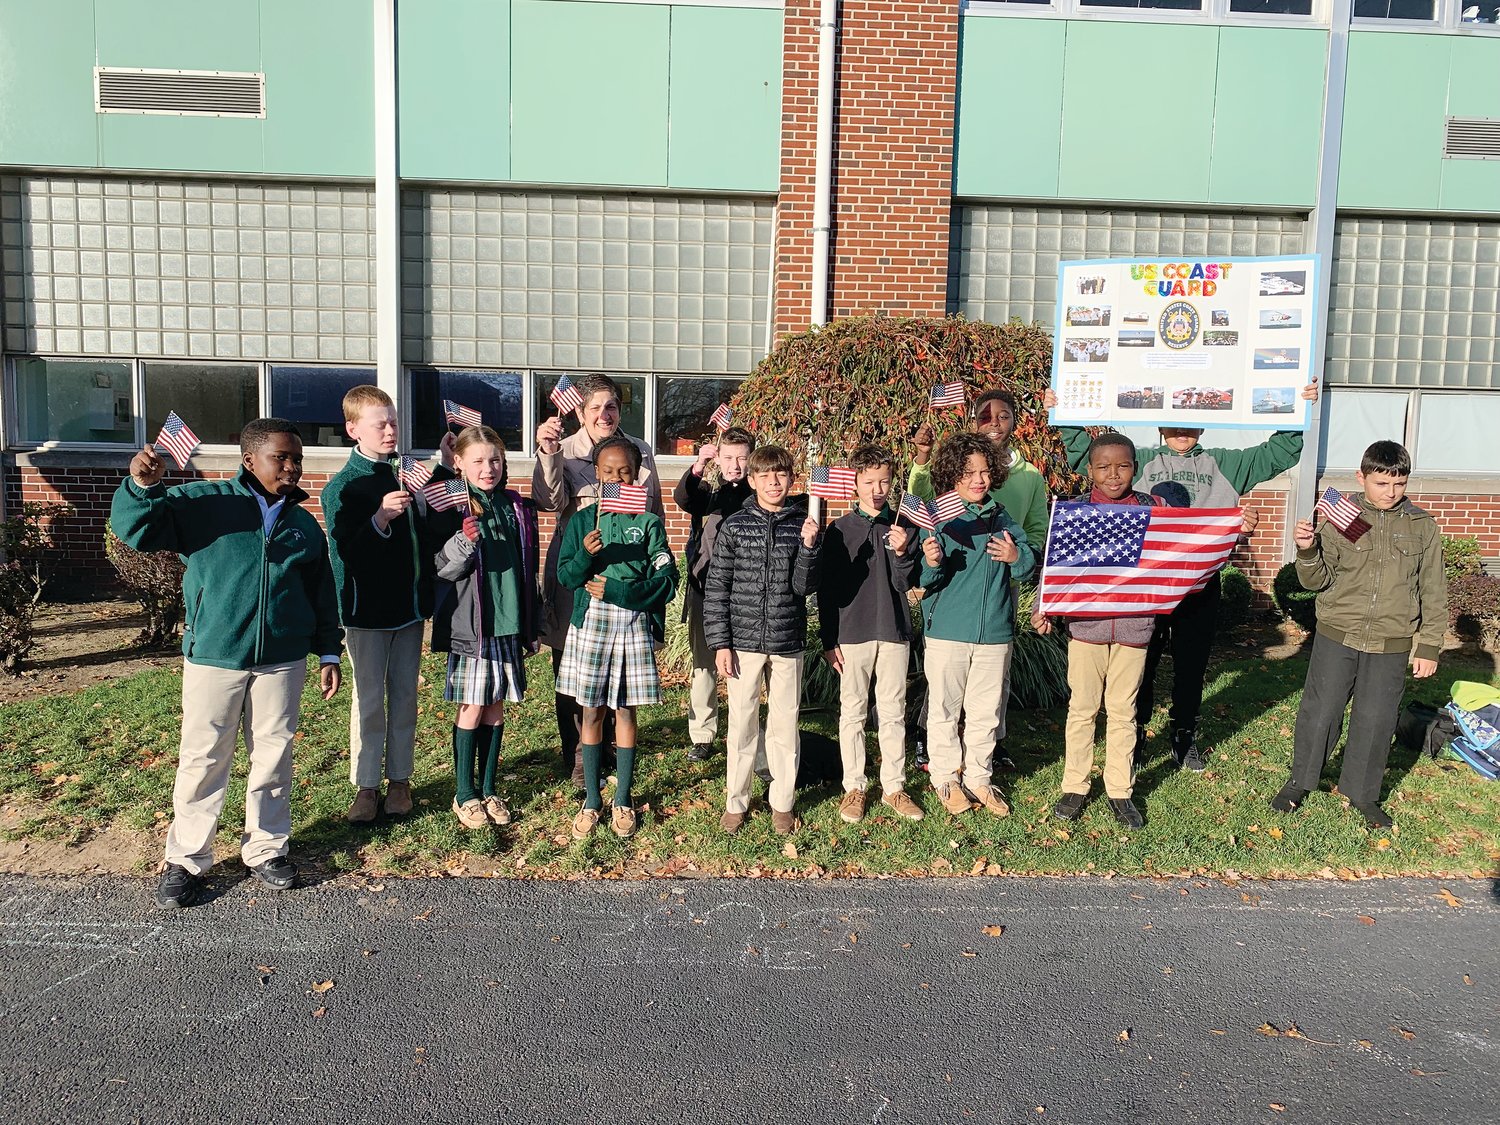 On November 10, students from Saint Teresa School in Pawtucket paid special tribute to the American veterans who have so heroically defended and served the country. Middle school students formed an honor guard to greet each student and parent as they arrived at school this morning. For the rest of the day students made ornaments for a veterans’ group and for the month of November the school community will collect warm clothing and food for veterans.